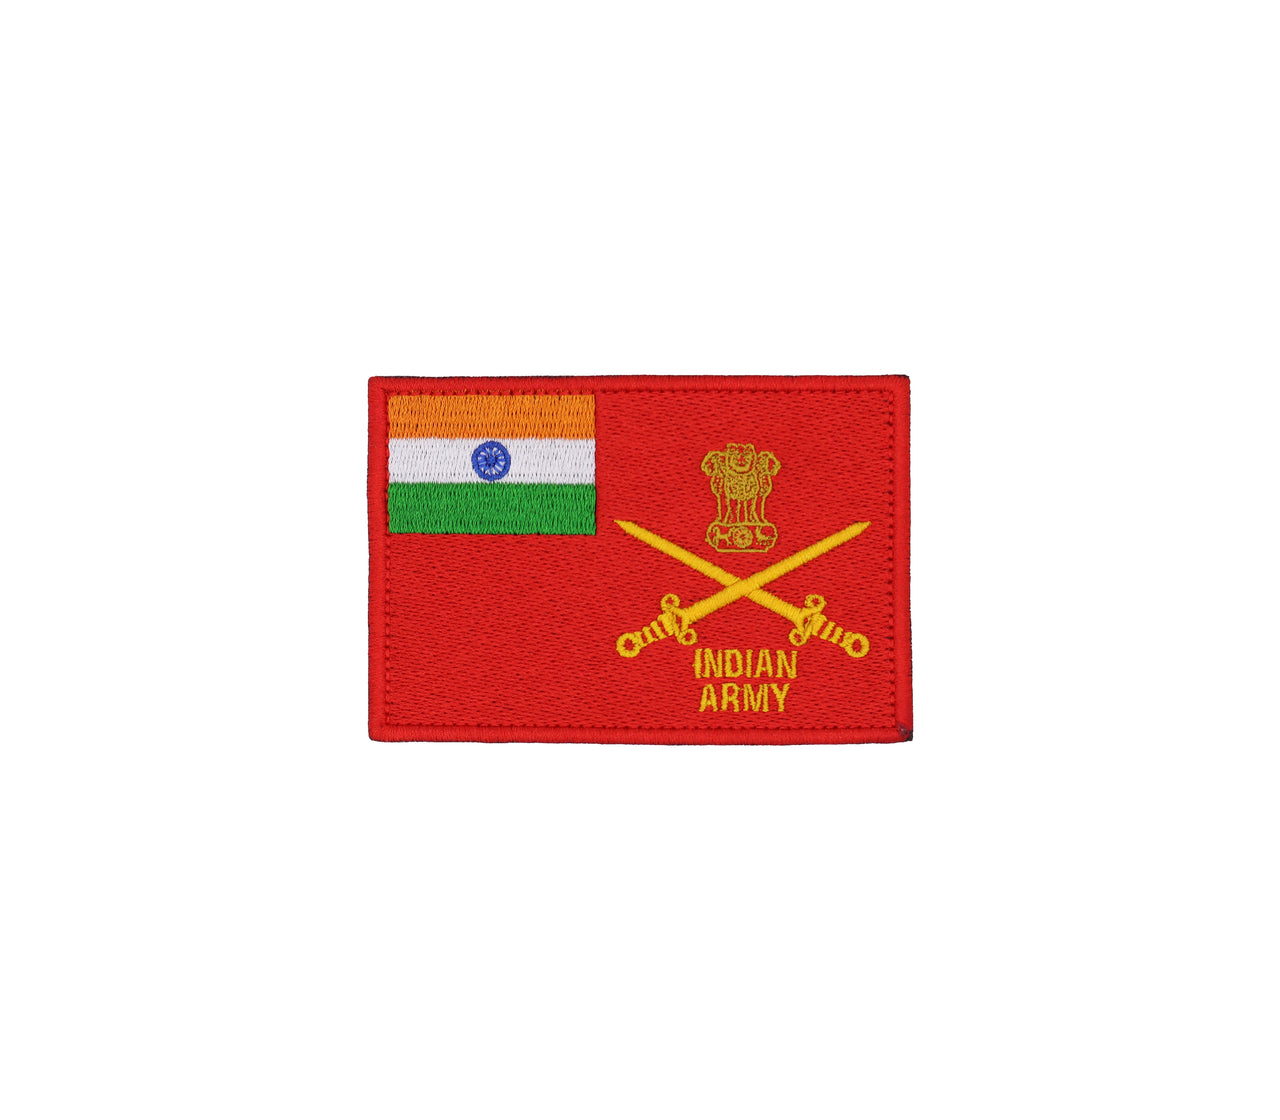 Indian Army Flag Patch - 2.5 x 3.5 Inches